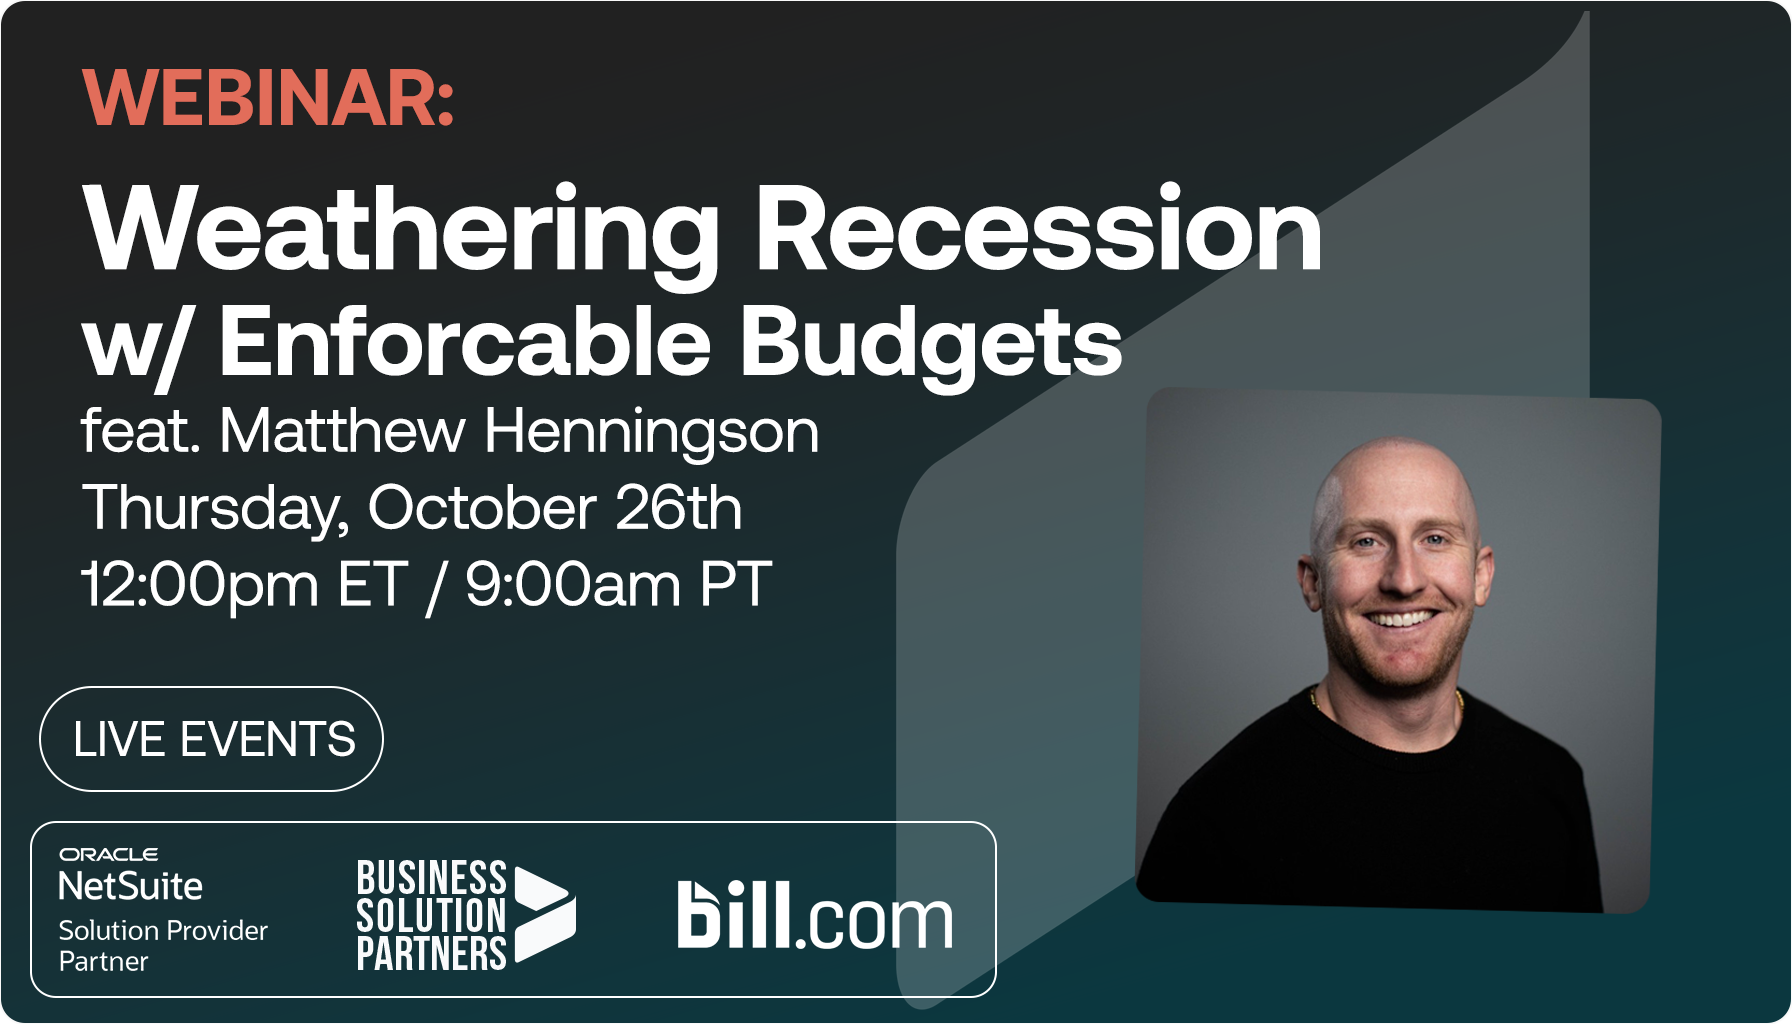 Webinar - Weathering Recession with enforceable budgets